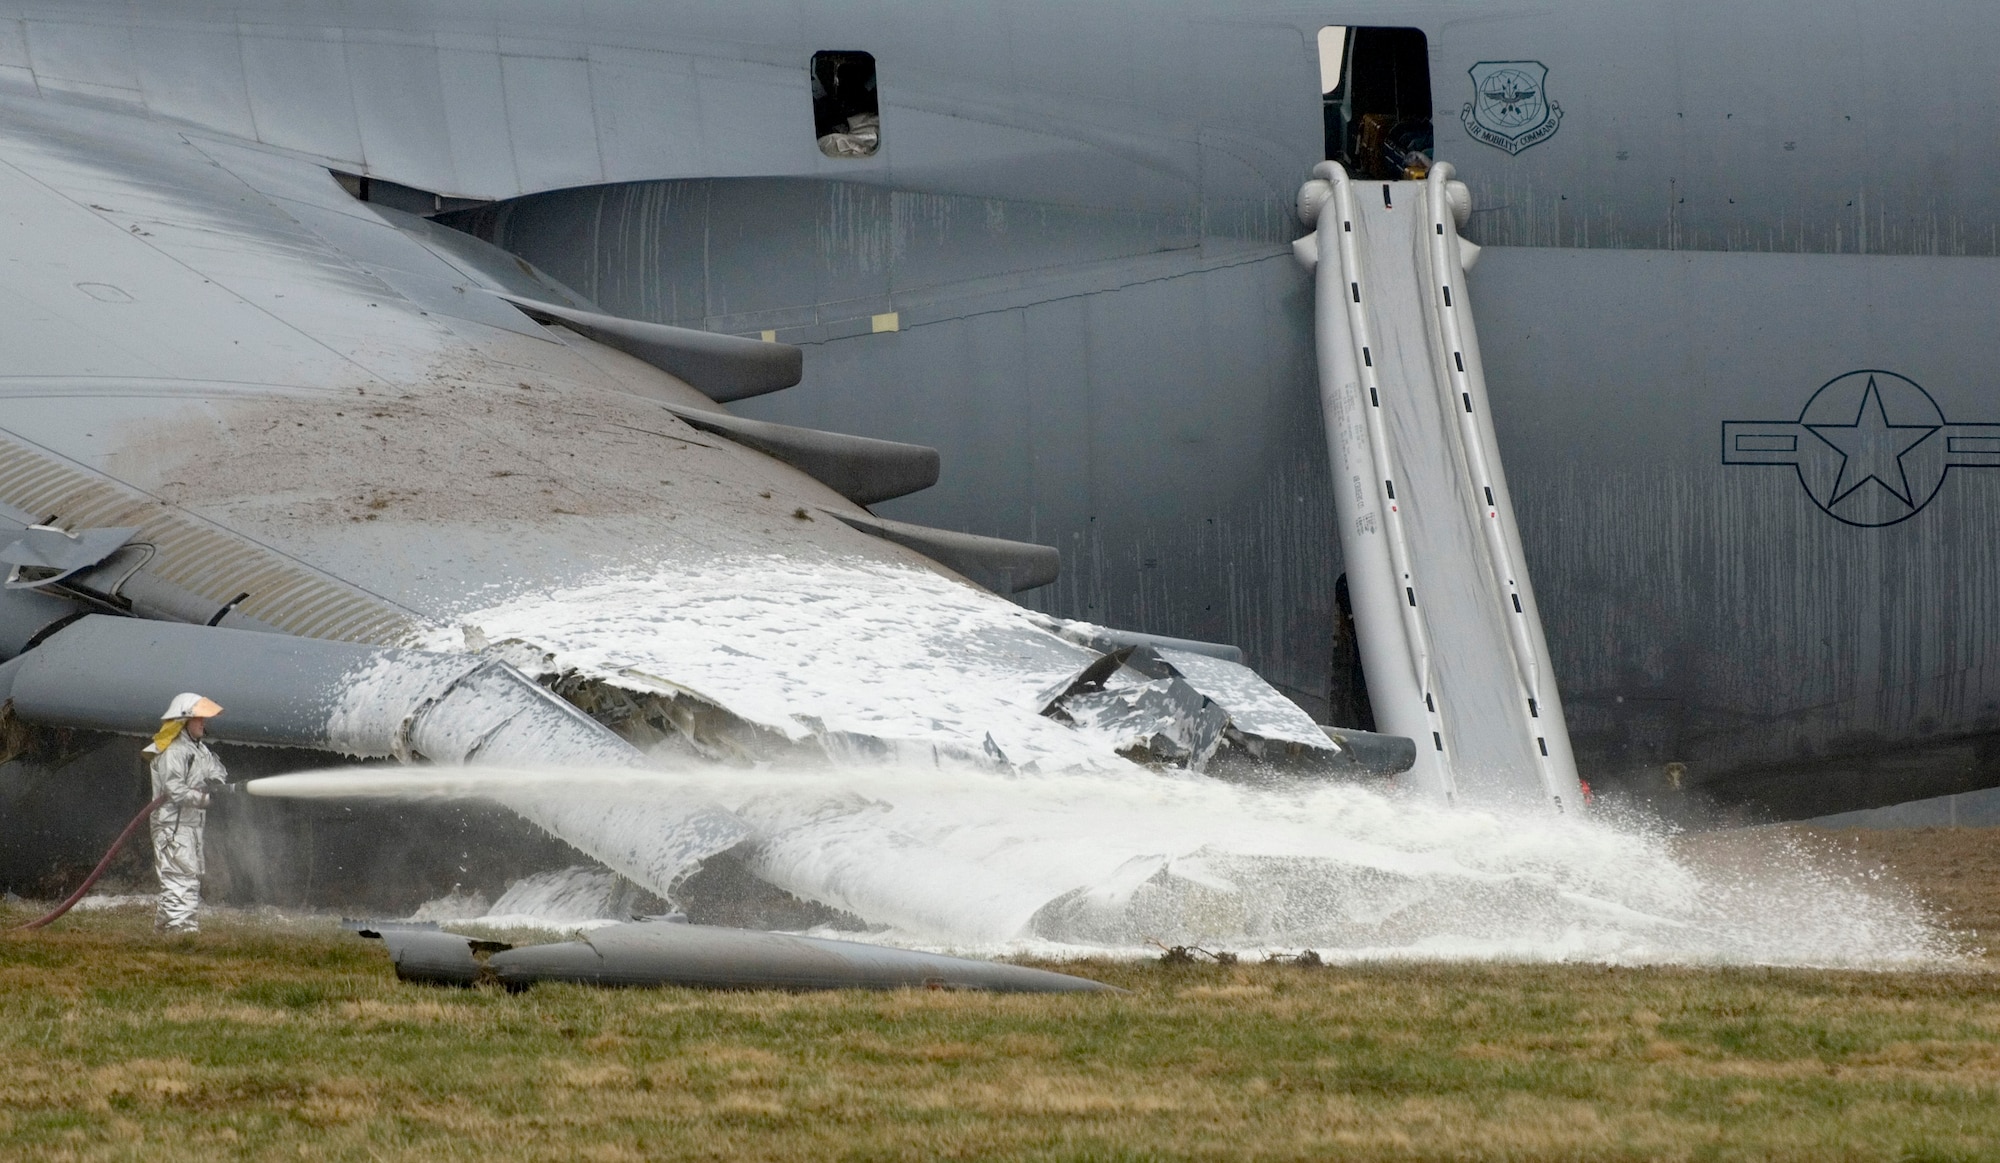 A firefighter hoses down the crash site of a C-5 Galaxy. The aircraft crashed at 6:30 a.m. EDT, today, April 3, 2006, at Dover Air Force Base, Del., just south of the base flightline. (U.S. Air Force photo/Doug Curran)